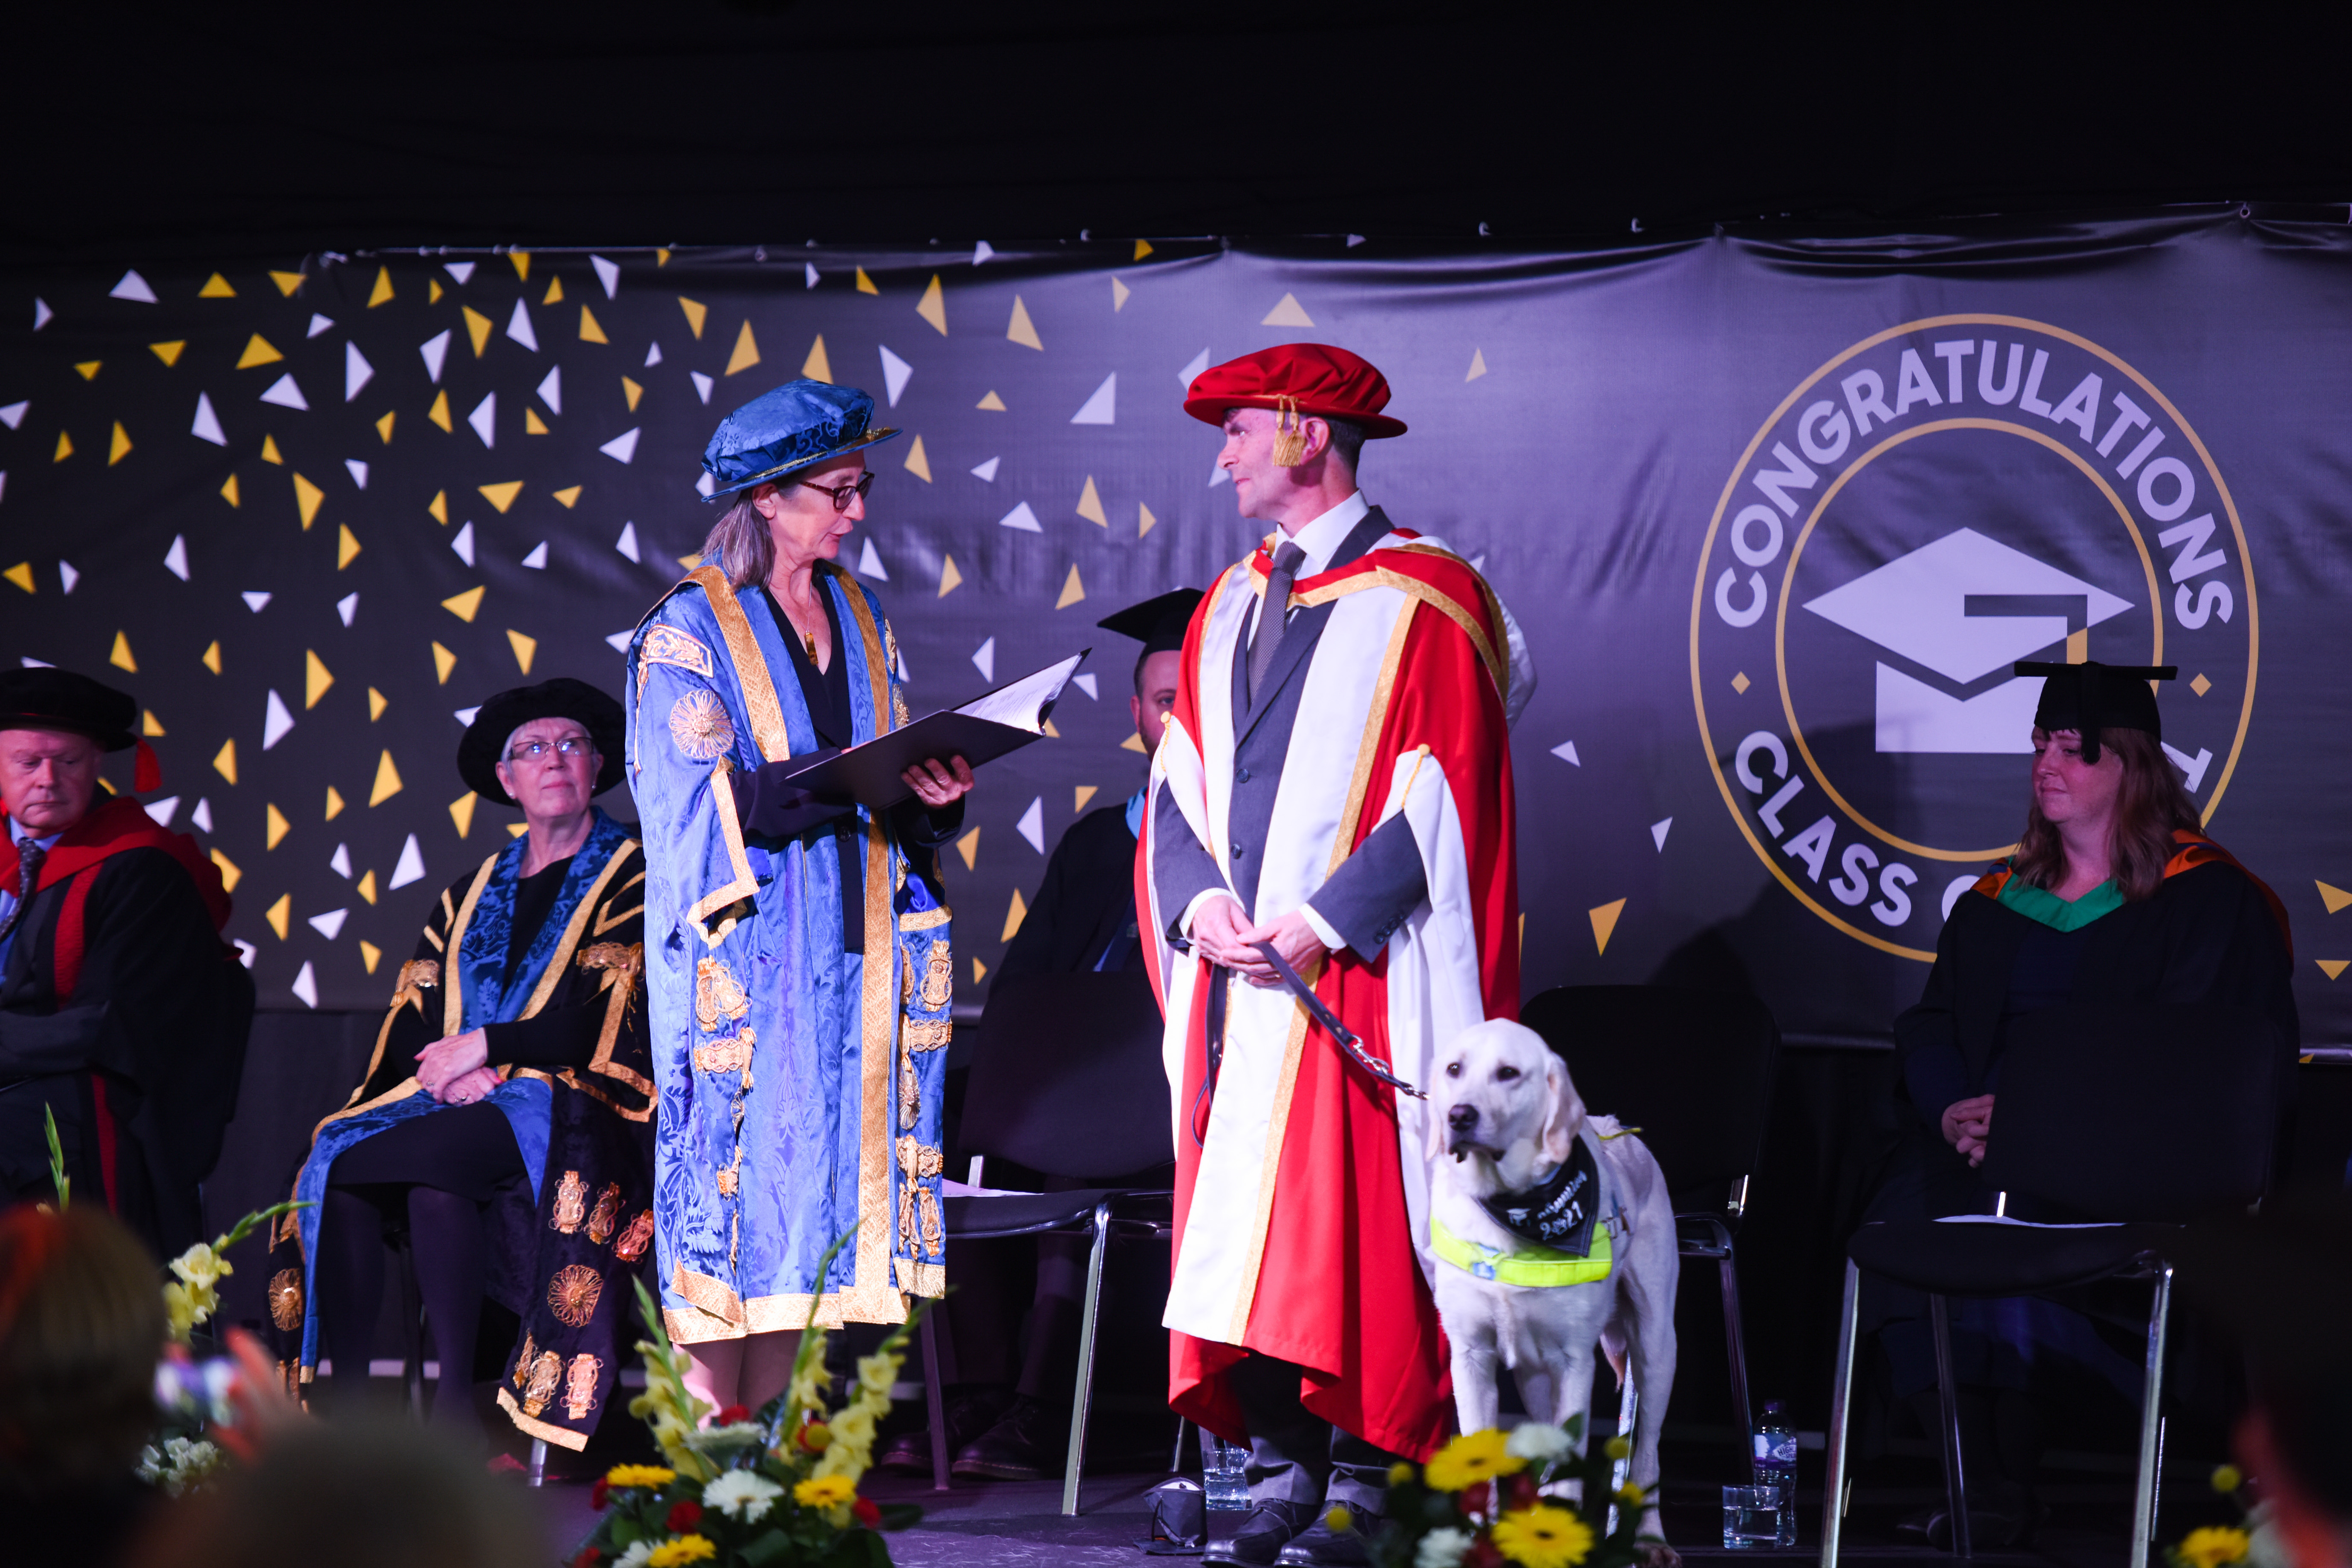 Chancellor of the University, Dr Helen Pankhurst awarding Robin Christopherson at the ceremony. Beside Robin stands his guide dog, Hugo.